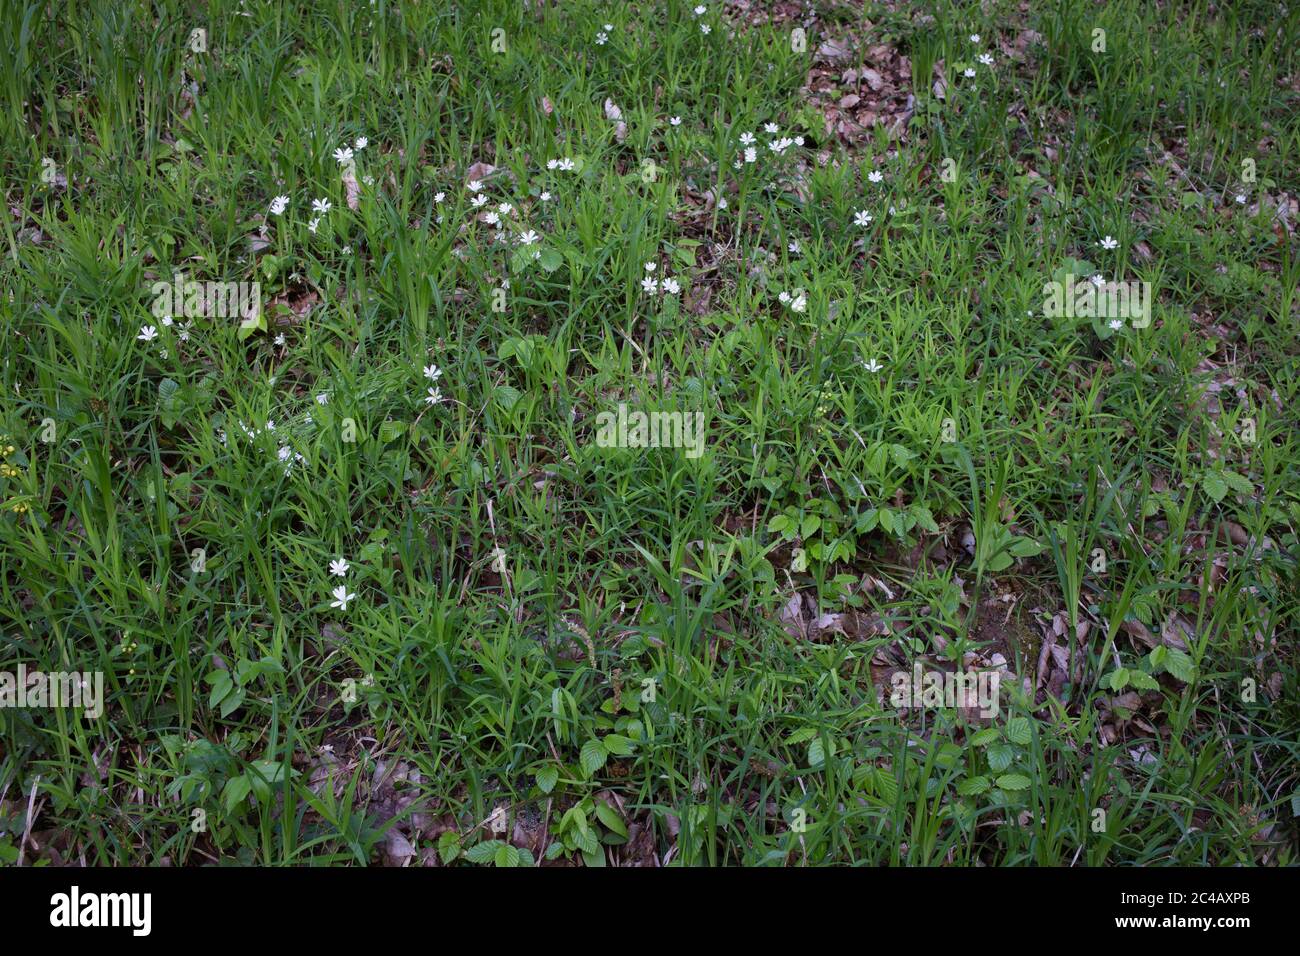 Beautiful summer meadow. Many white daisies in top view of meadow, several Bird's-eye Speedwell also visible. Bellis perennis and Veronica chamaedrys. Stock Photo